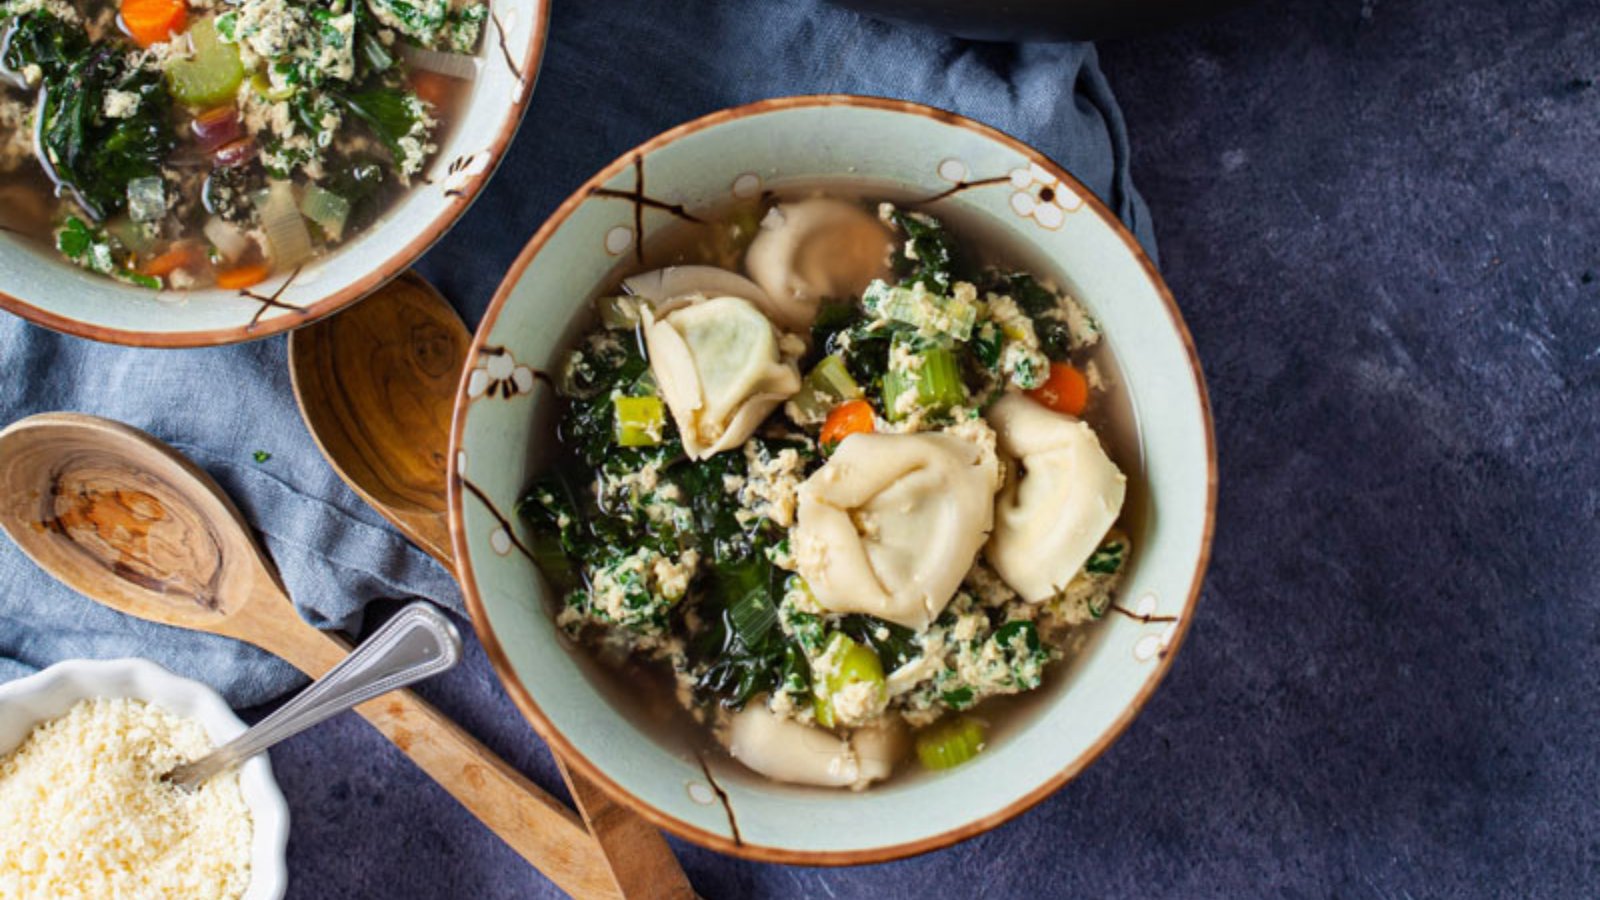 12 Easy Recipes That Will Make Kale Your New Favorite - Salt in my Coffee